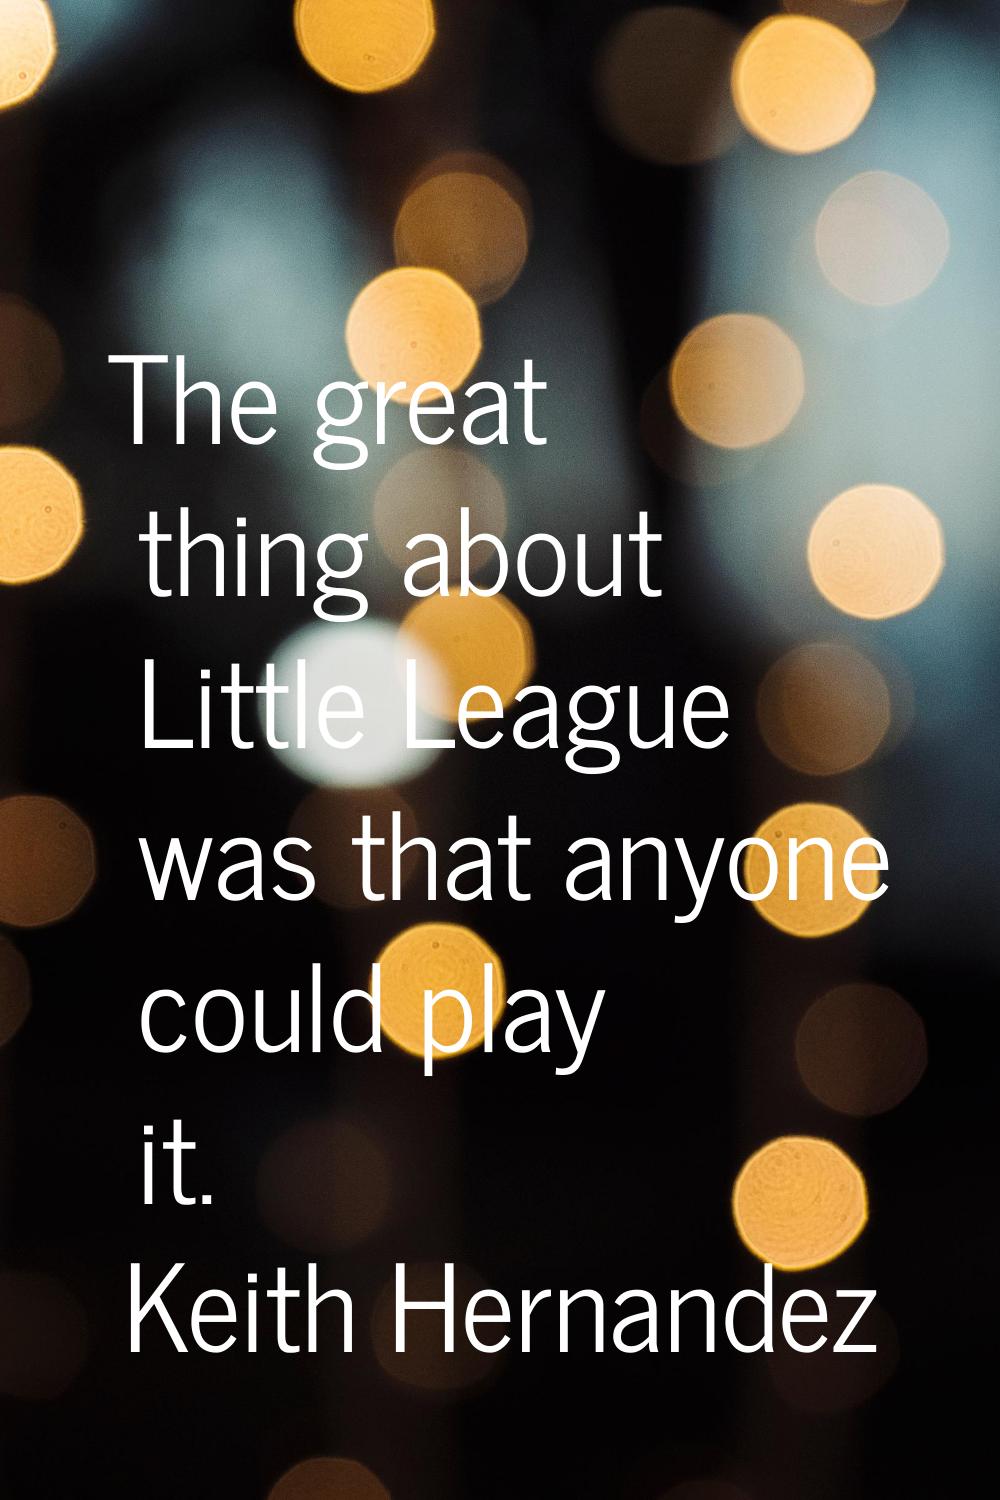 The great thing about Little League was that anyone could play it.